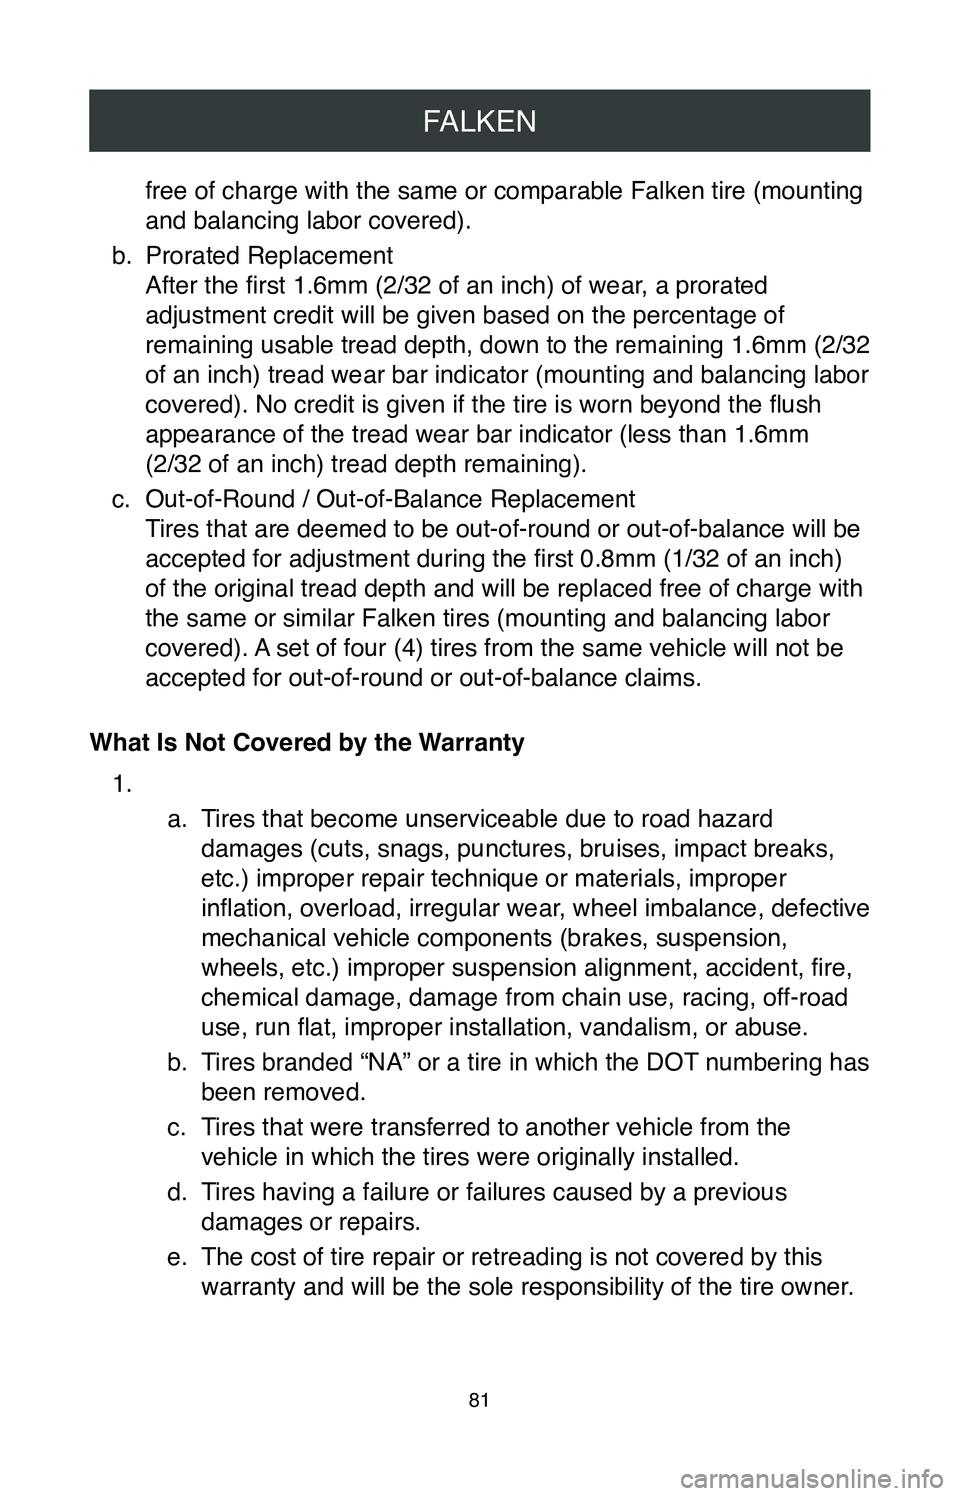 TOYOTA AVALON HYBRID 2020  Warranties & Maintenance Guides (in English) FALKEN
81
free of charge with the same or comparable Falken tire (mounting 
and balancing labor covered).
b.
 Prorated Replacement 
After the first 1.6mm (2/32 of an inch) of wear, a prorated 
adjustm